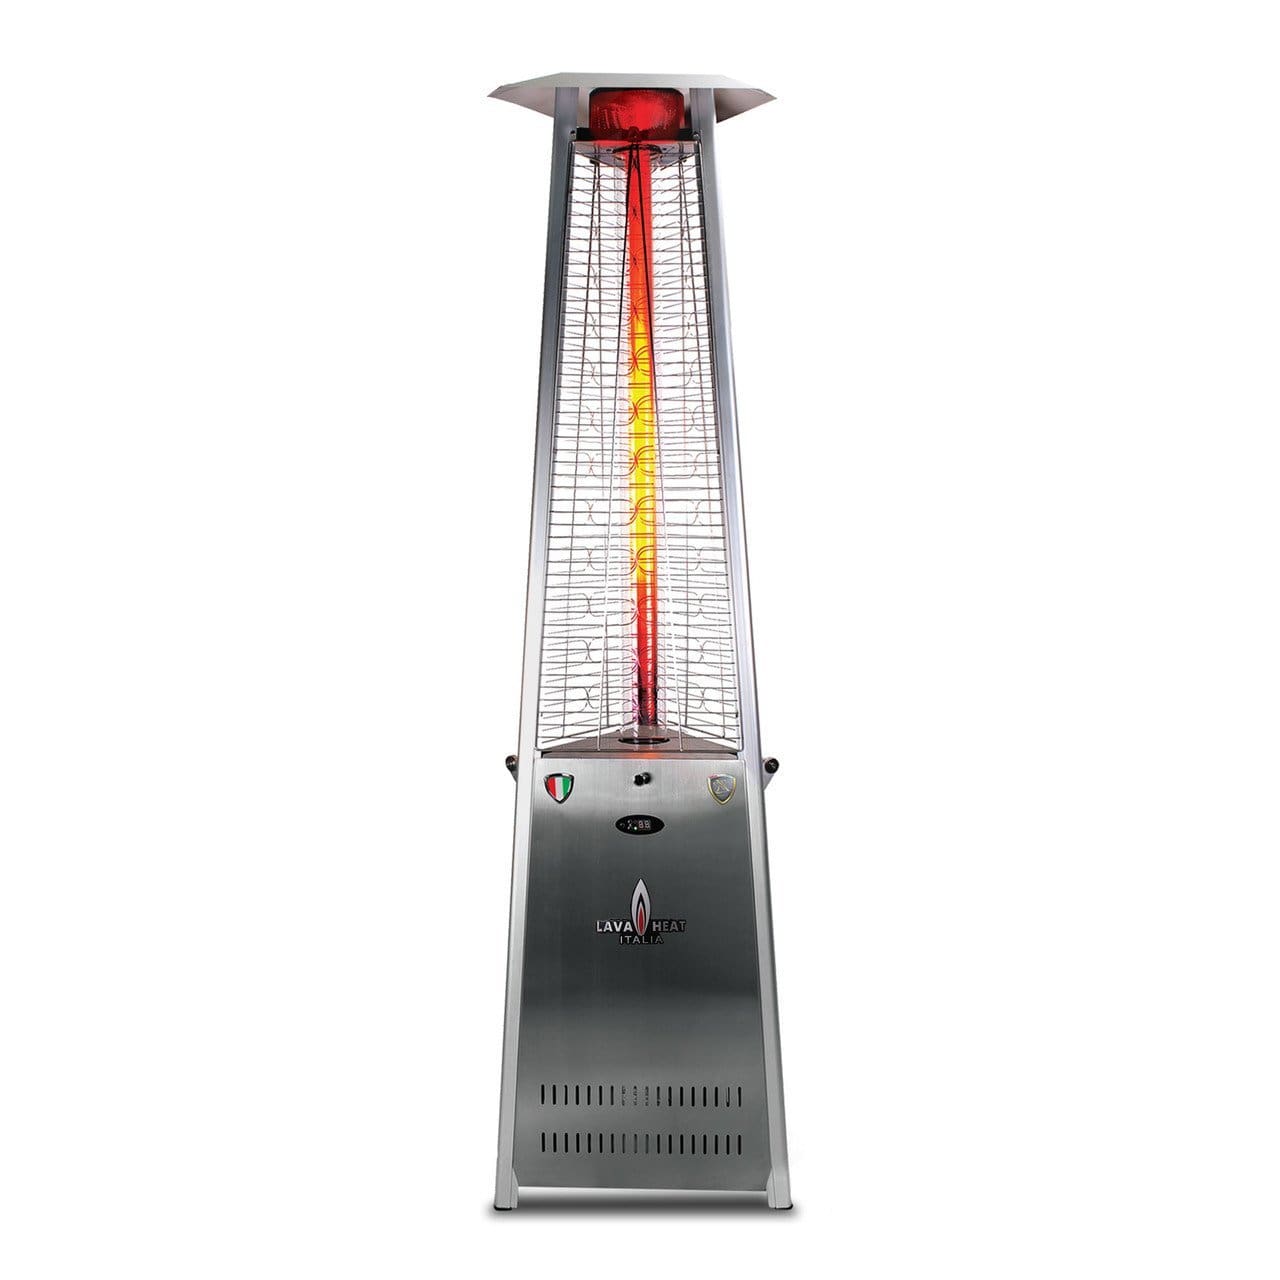 Lava Heat Italia Tower Patio Heater Natural Gas / Stainless Steel The 2G Triangle Flame Tower Heater, 92.5", 66,000 BTU, Remote Control, Push Button Ignition, Stainless Steel, Bronze, Black, Liquid Propane or Natural Gas - ASSEMBLED